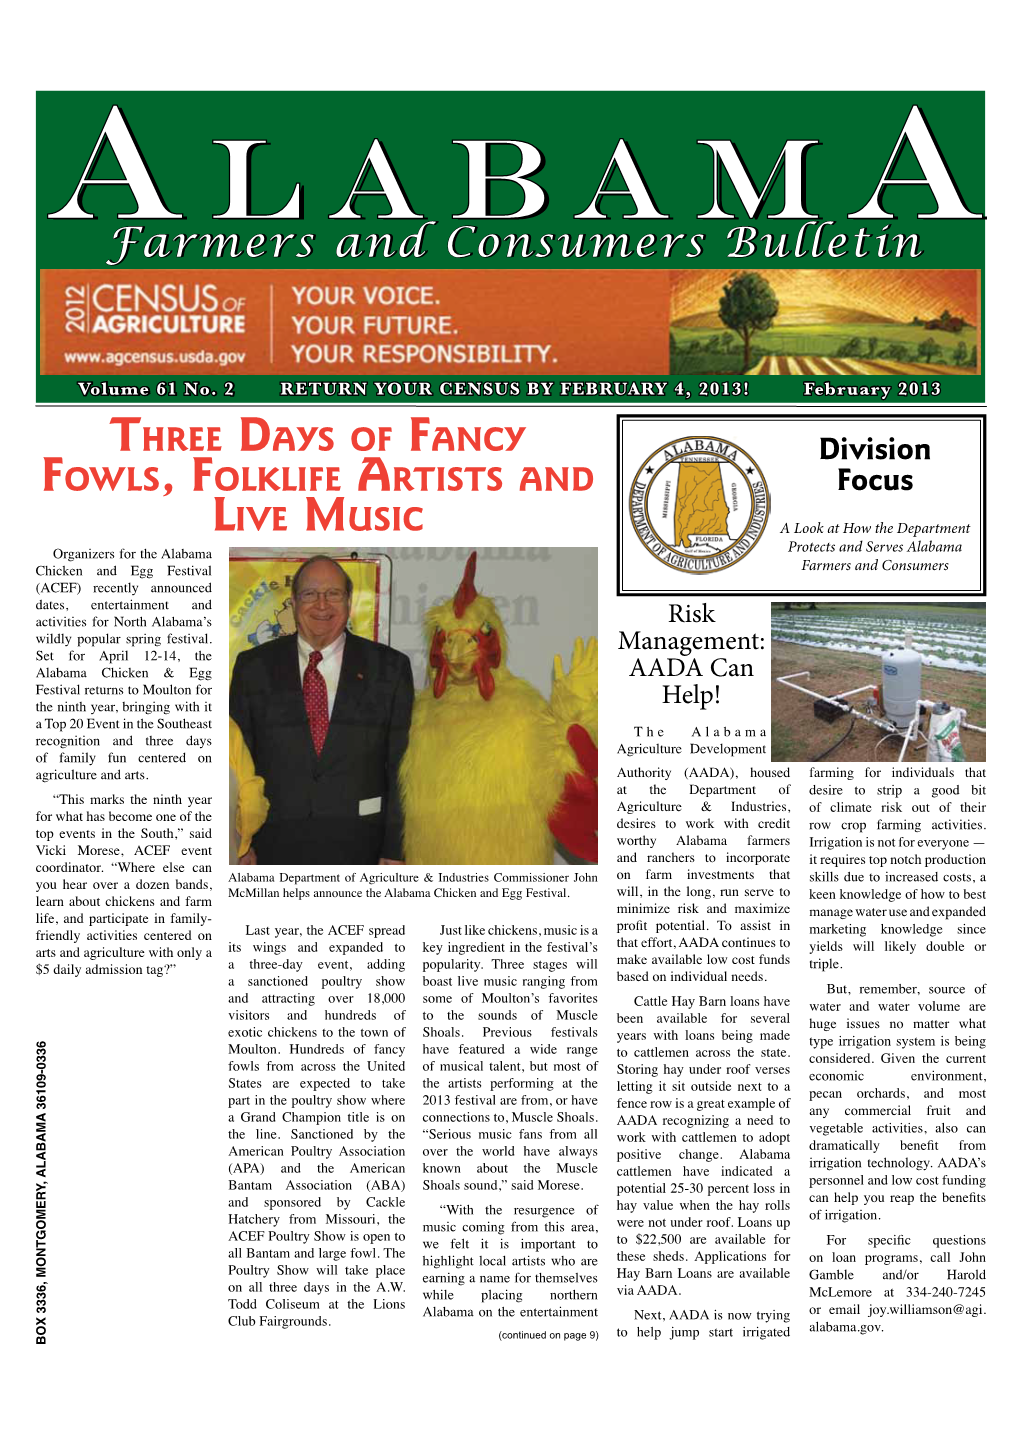 Farmers and Consumers Bulletin Page 2